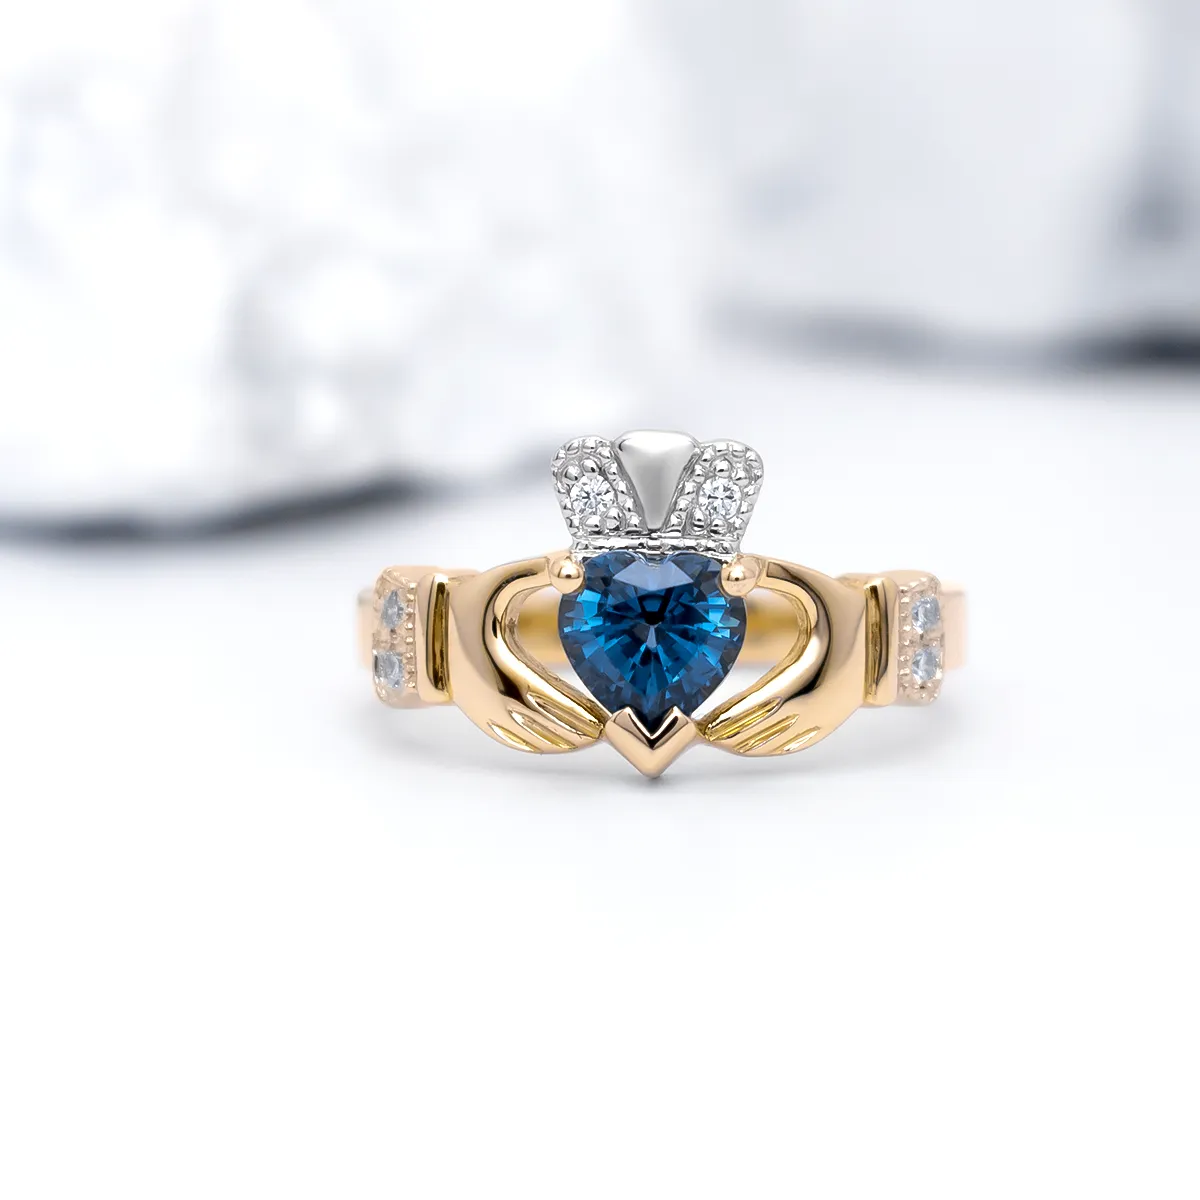 Authentic Sapphire Claddagh Ring, Handcrafted In 14K Gold And Set With...